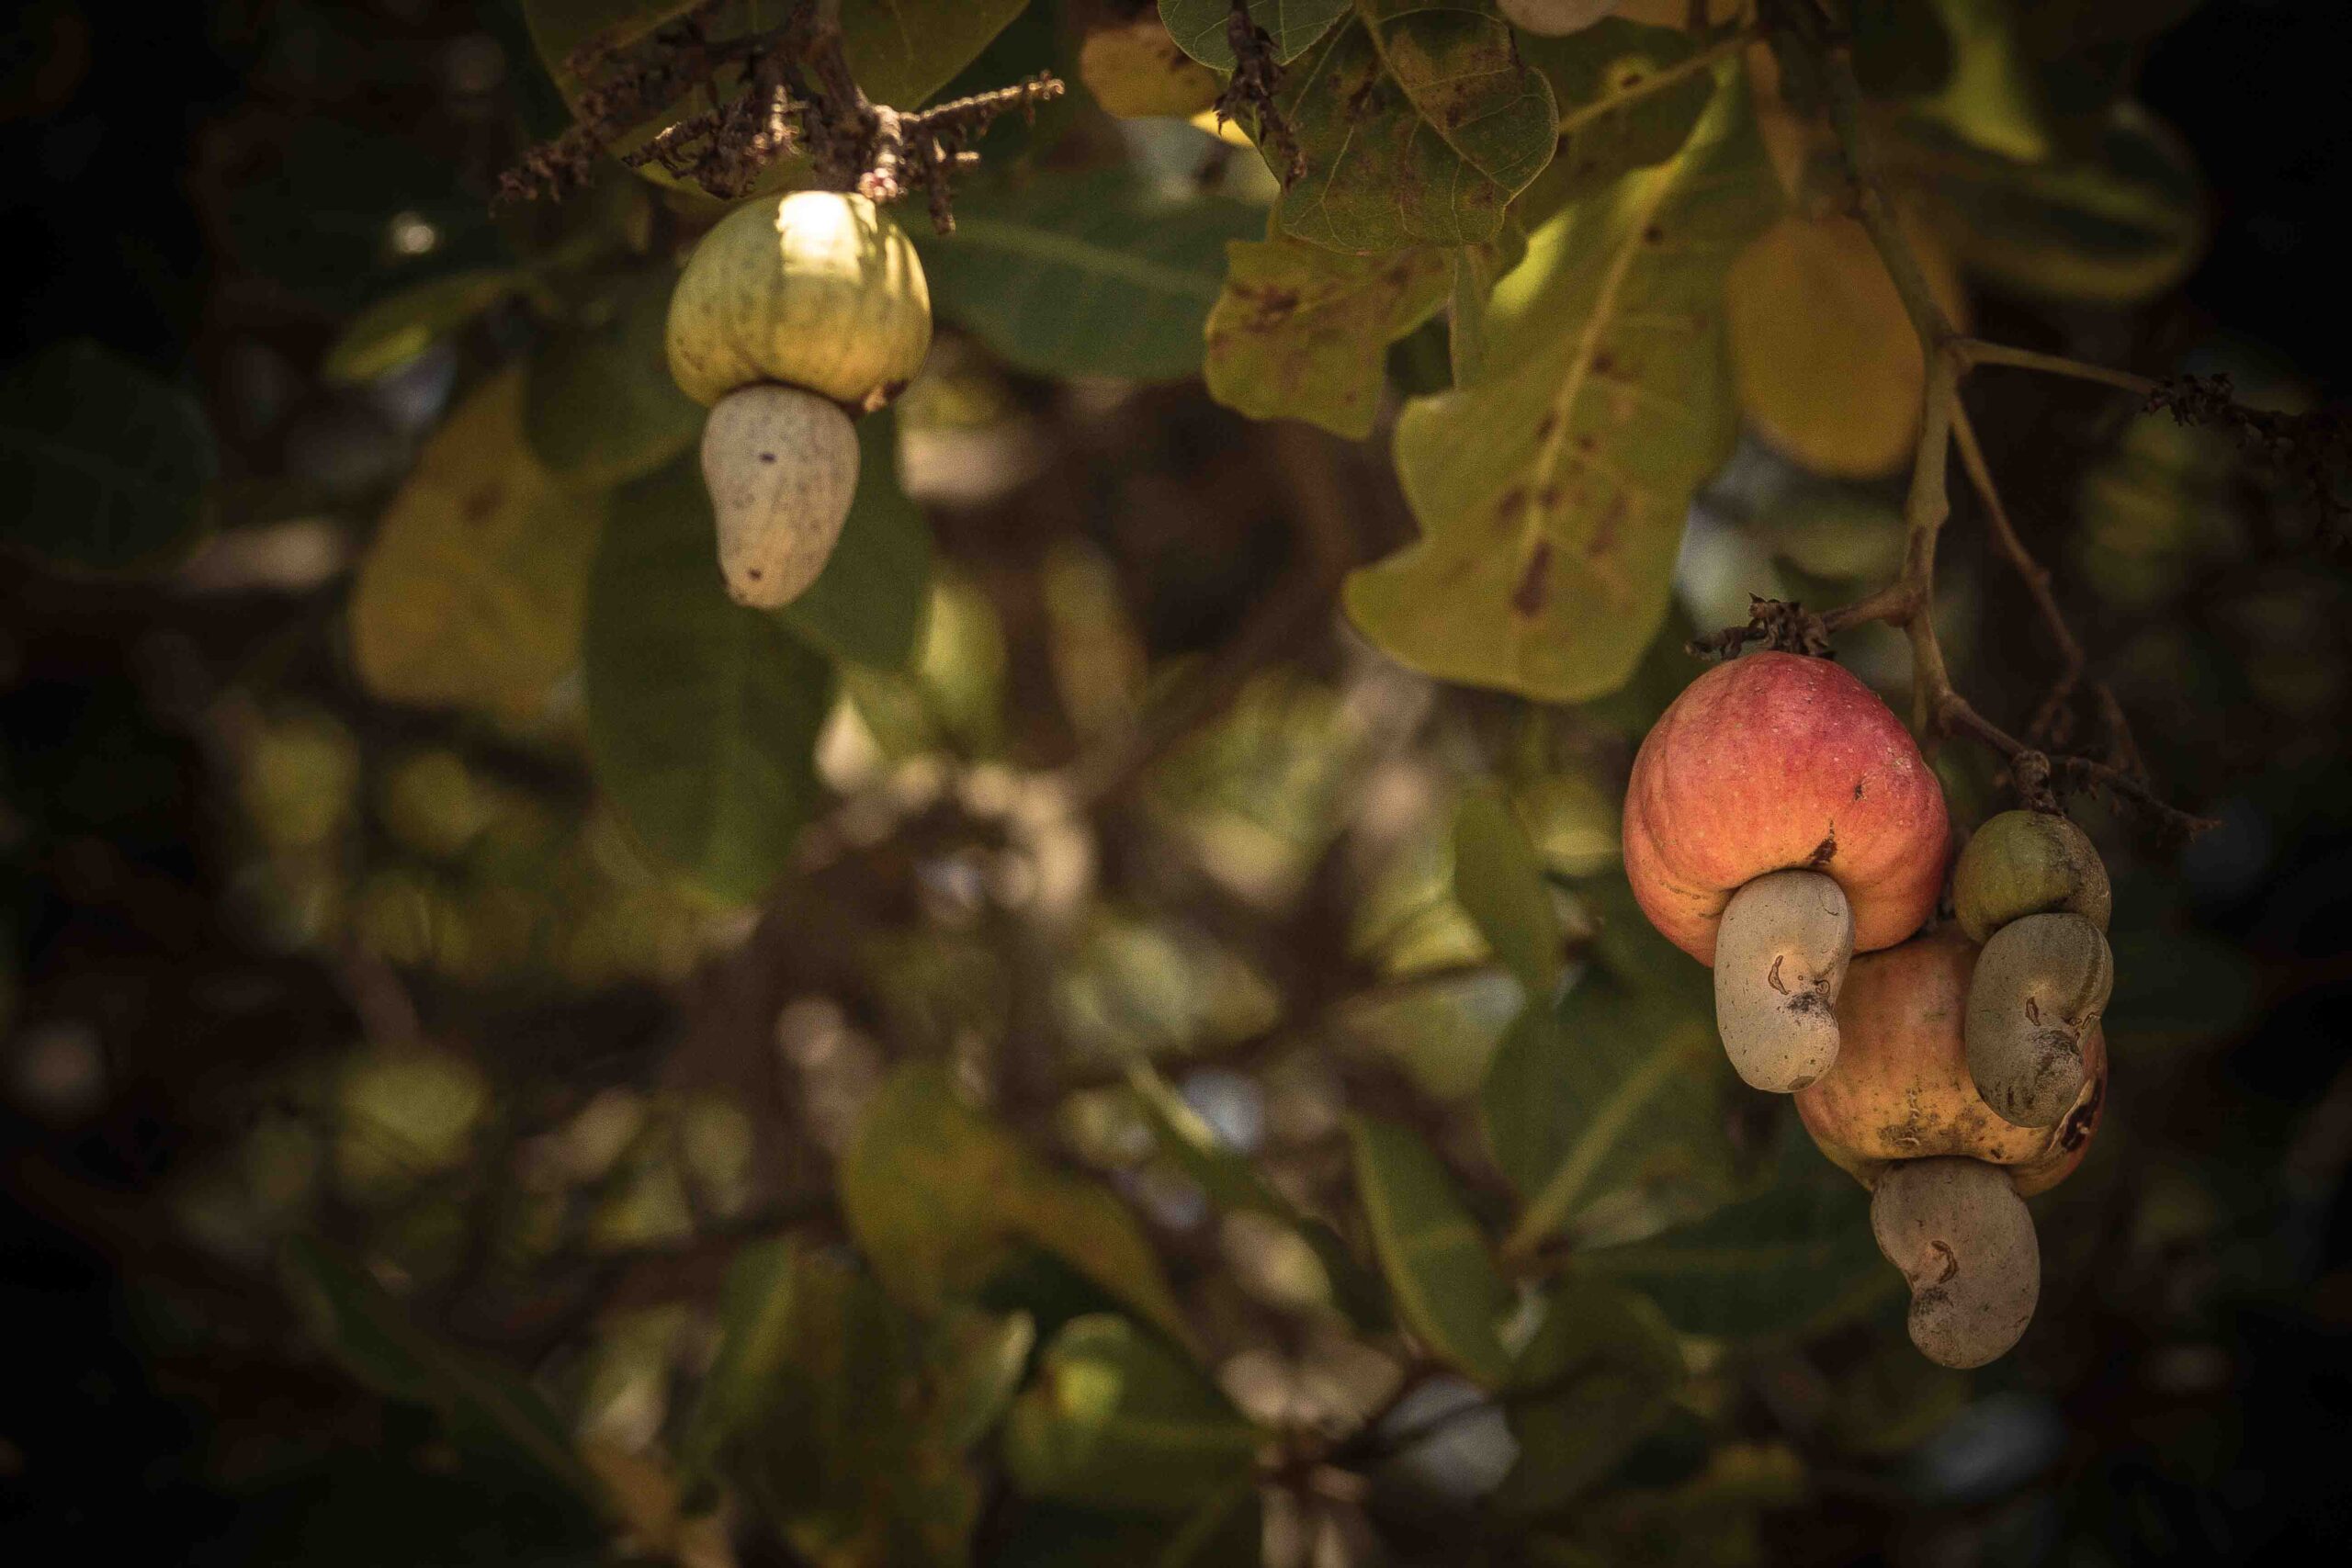 Cashews growing on a tree in Mozambique.